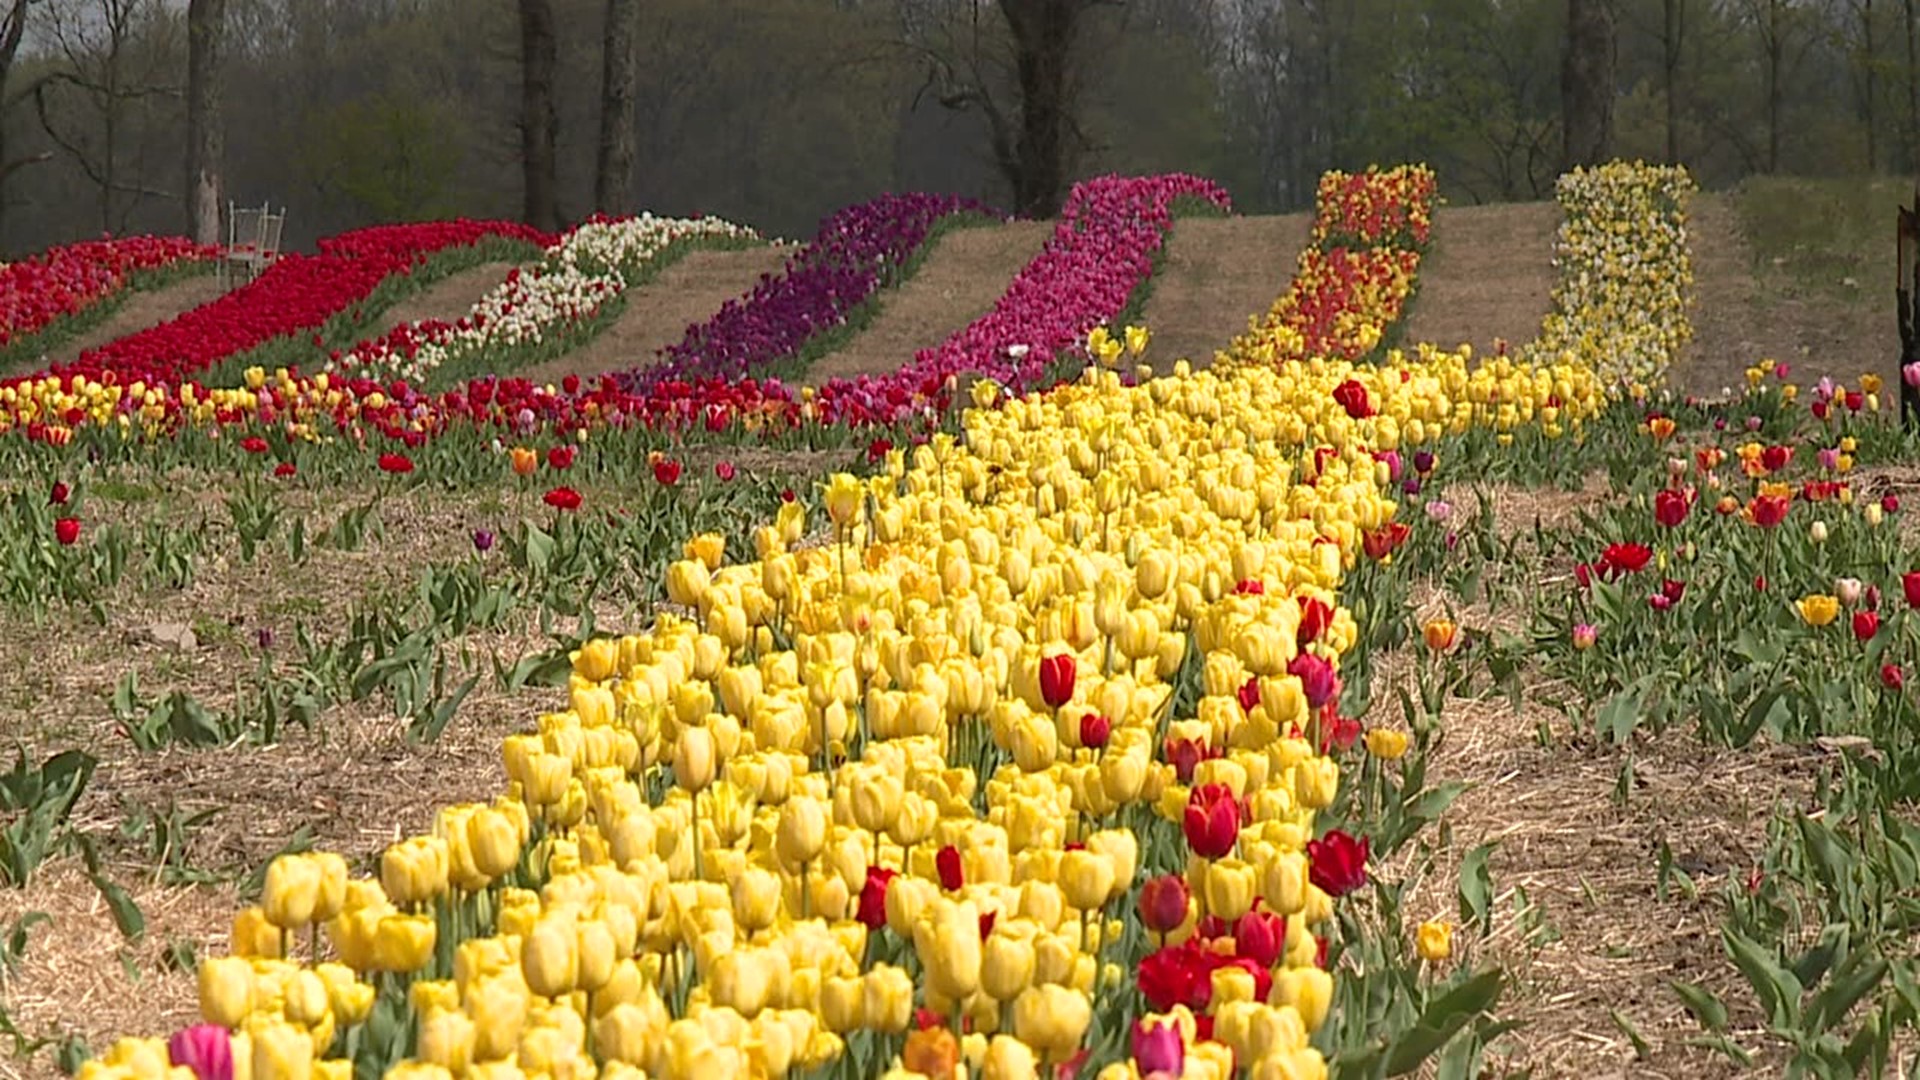 Is it possible for our eyes to experience a color overload? That's the way some feel when visiting the tulip fields at Brown Hill Farms north of Tunkhannock.